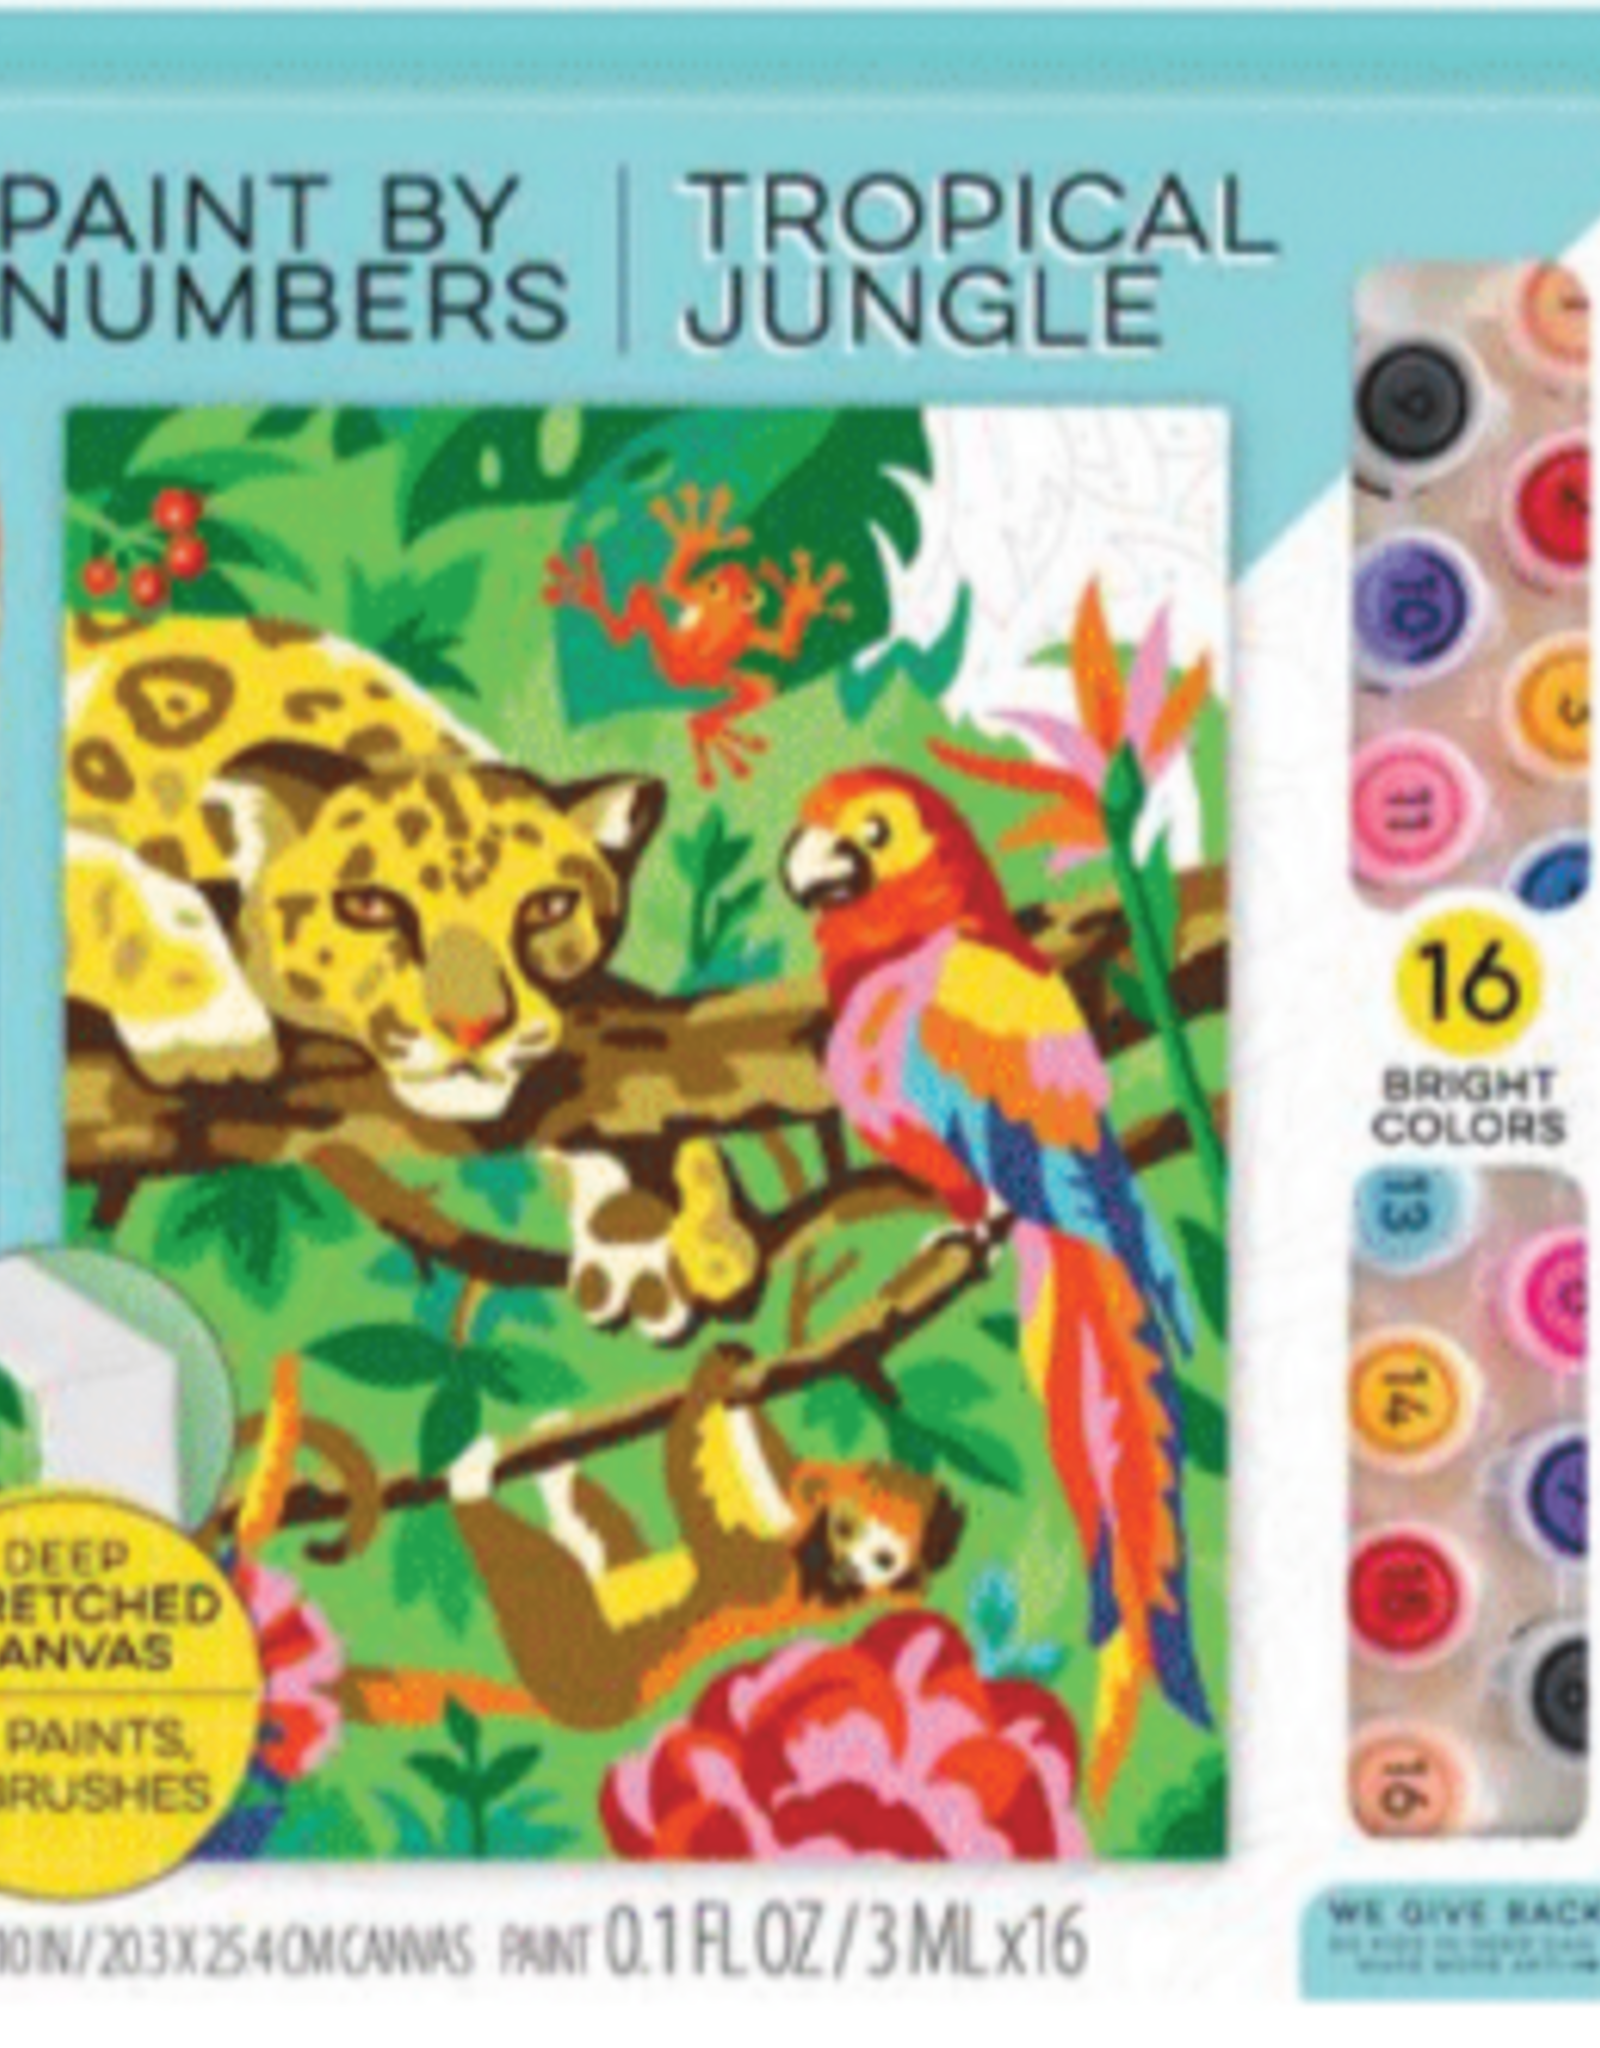 BRIGHT STRIPES TROPICAL JUNGLE PAINT BY NUMBER